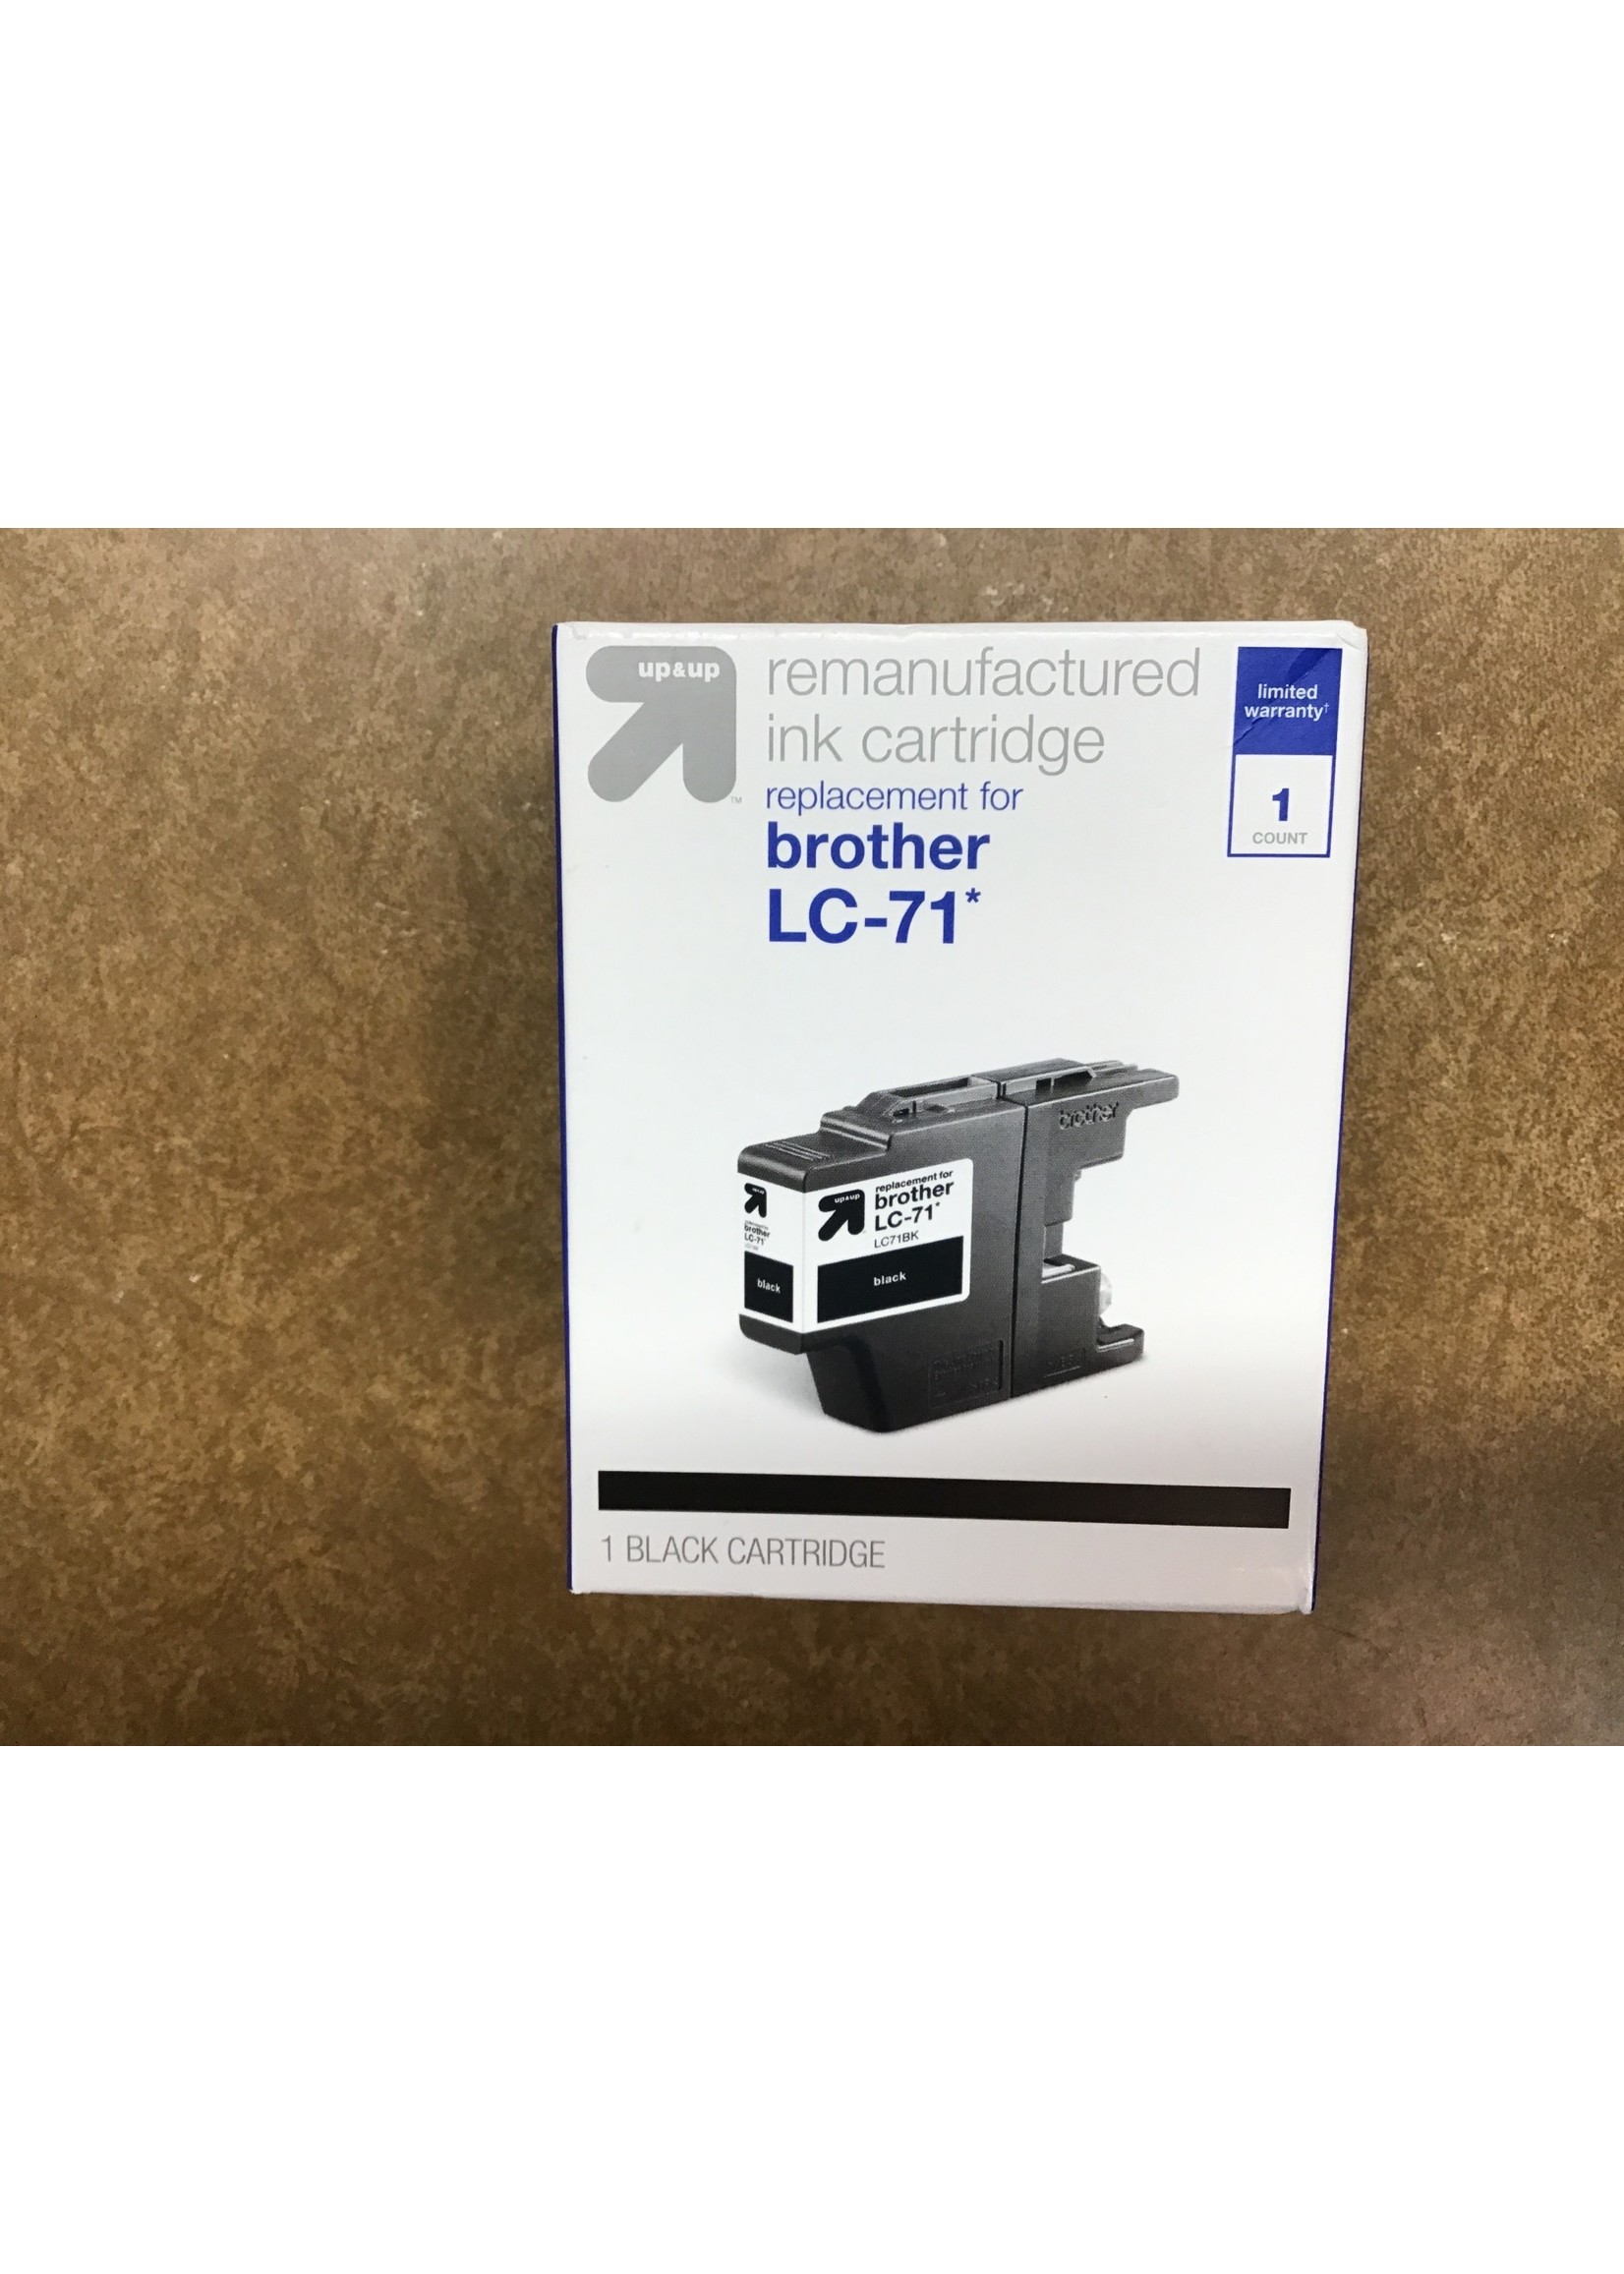 Remanufactured Single Black Standard Ink Cartridge - Compatible with Brother LC 71 Ink Series Printer - up & up